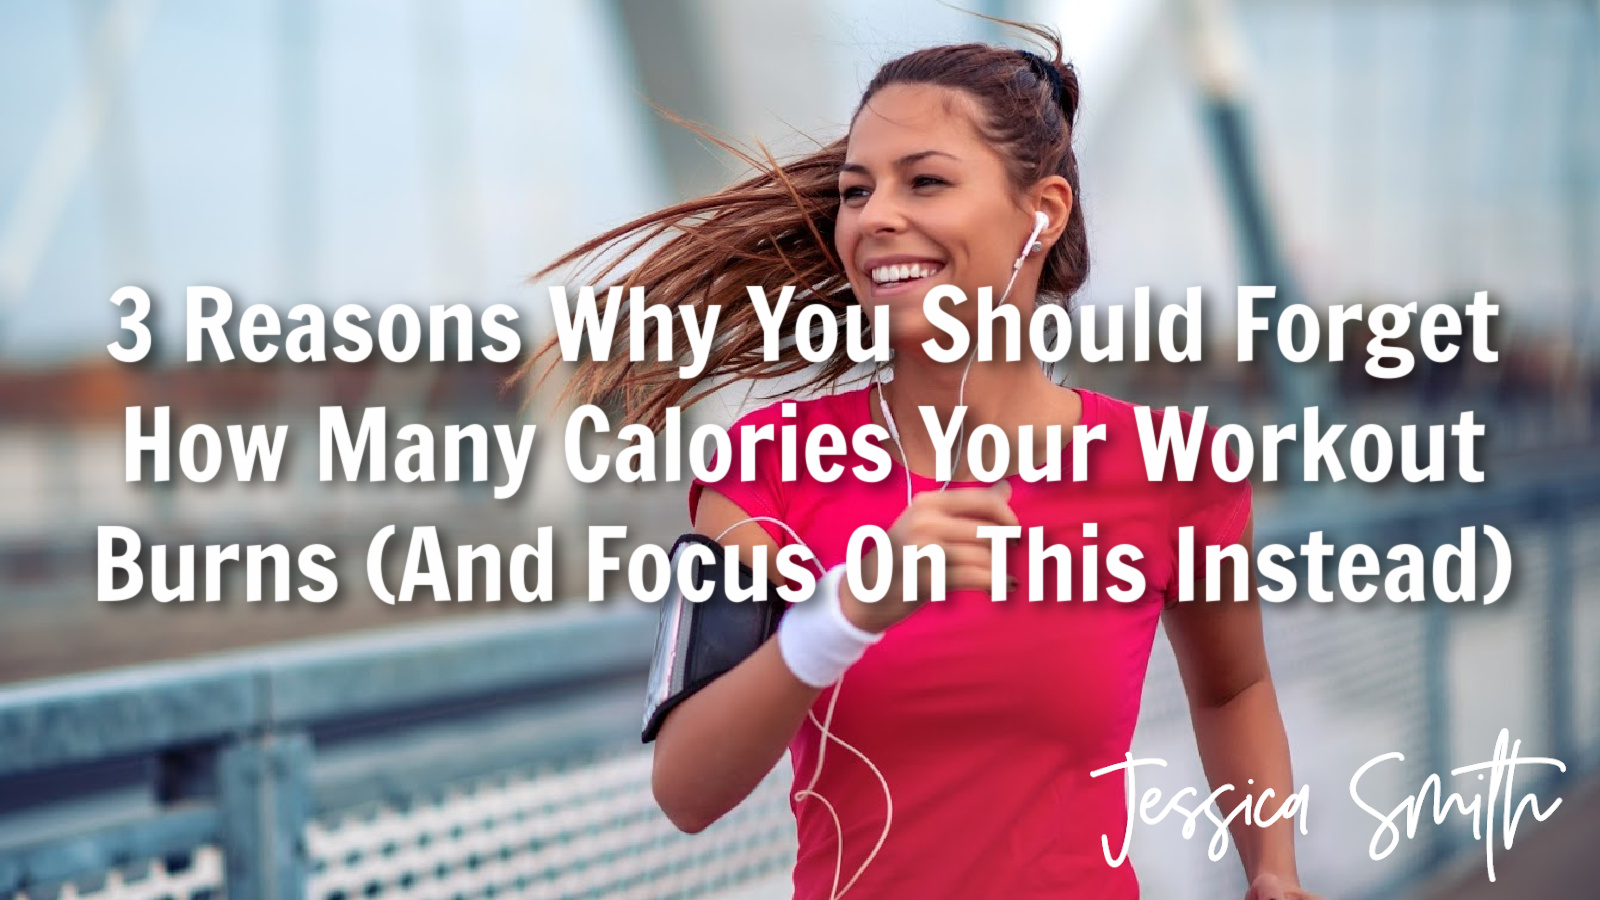 3 Reasons Why You Should Forget How Many Calories Your Workout Burns (And Focus On This Instead)